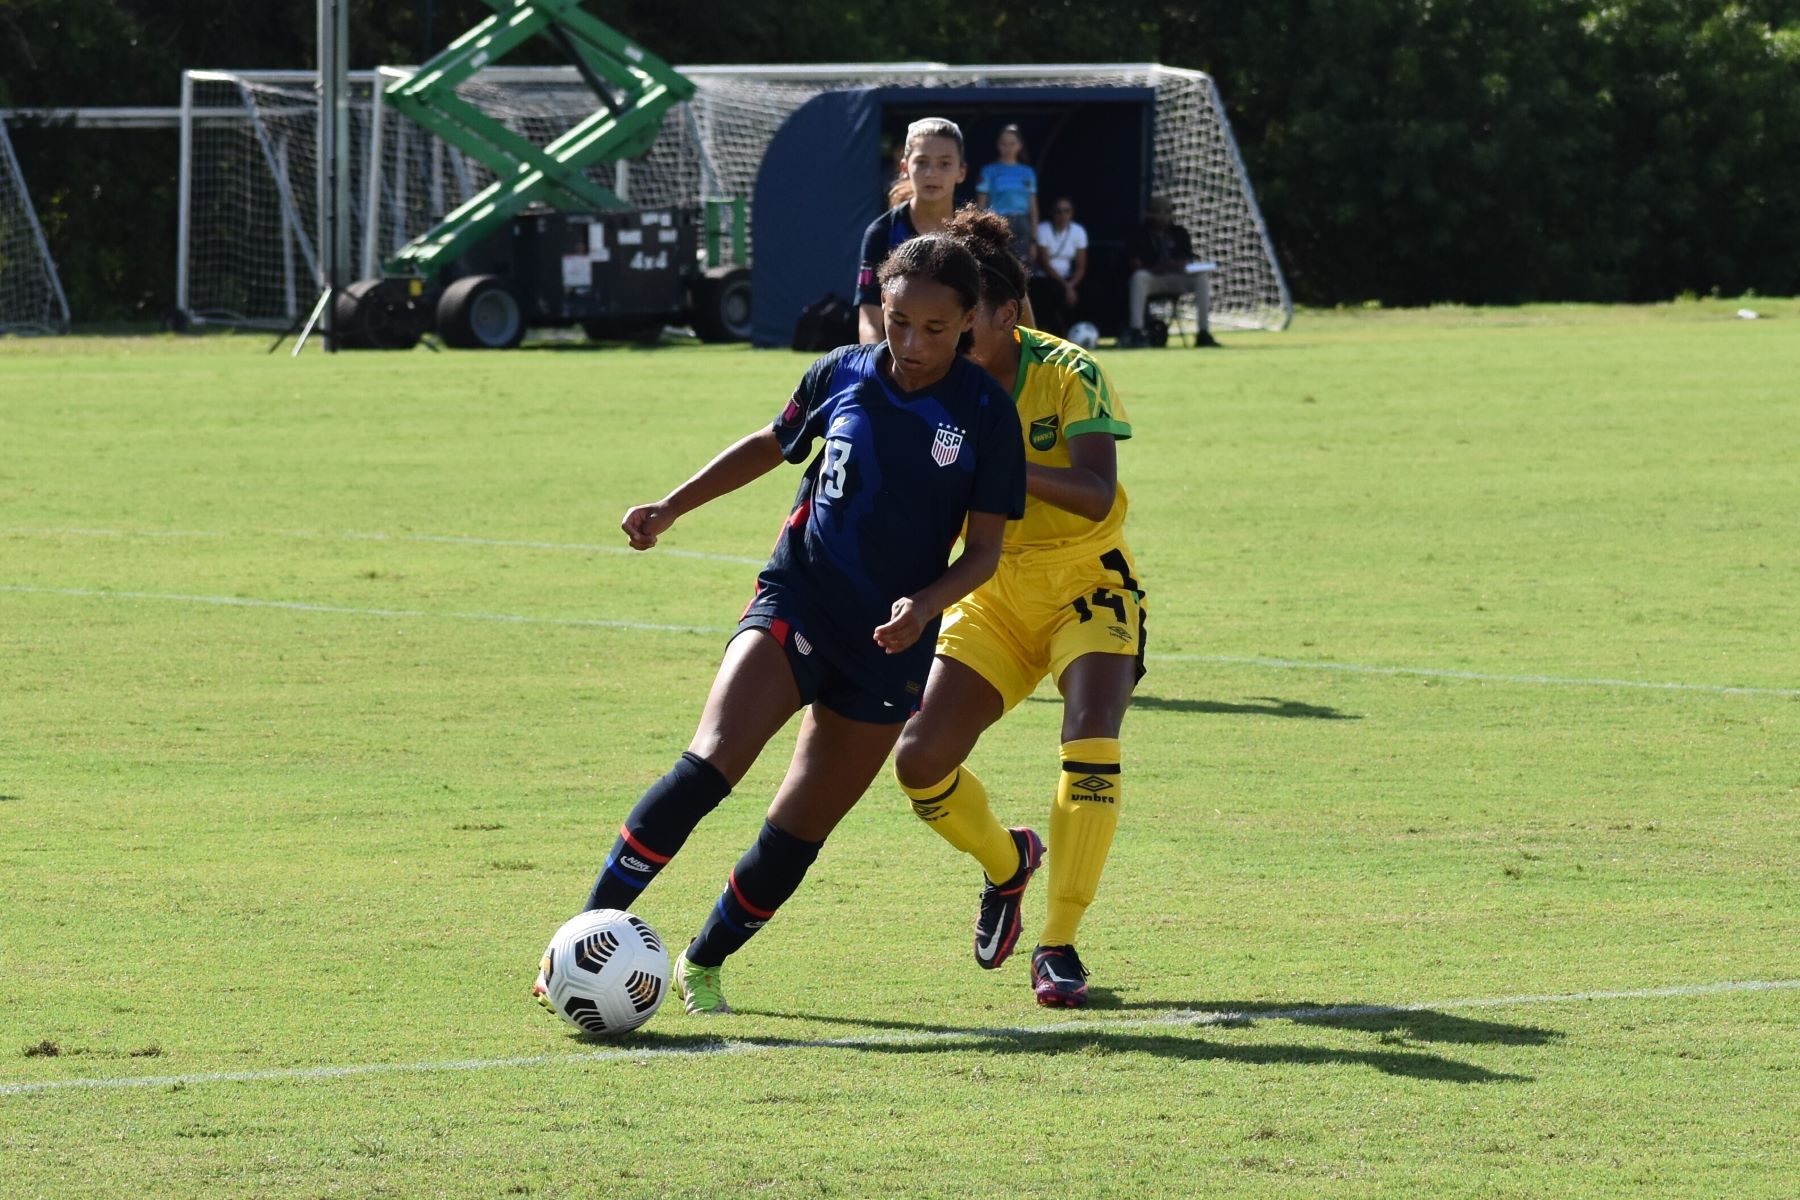 Concacaf Under-15 Girls Championship: USA cruises past Canada to claim  crown 08/08/2022